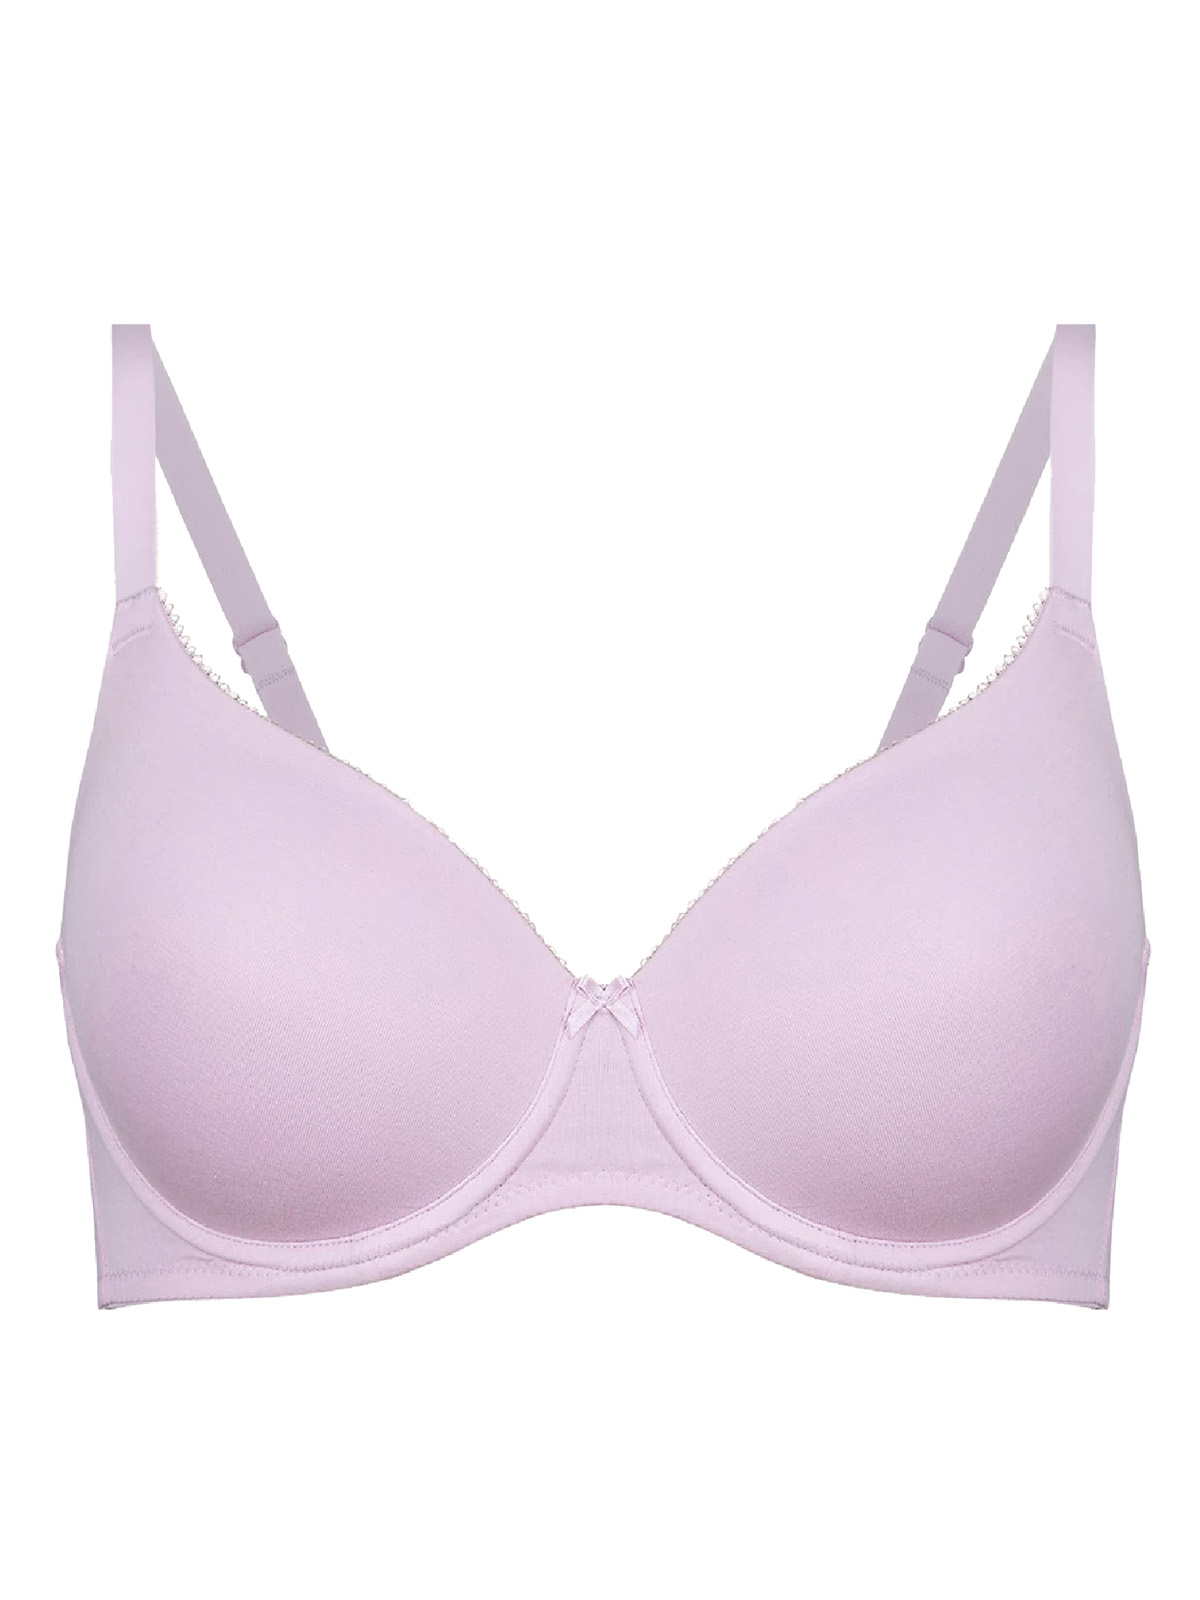 Marks and Spencer - - M&5 ASSORTED Full Cup & Push Up Bras - Size 32 to ...